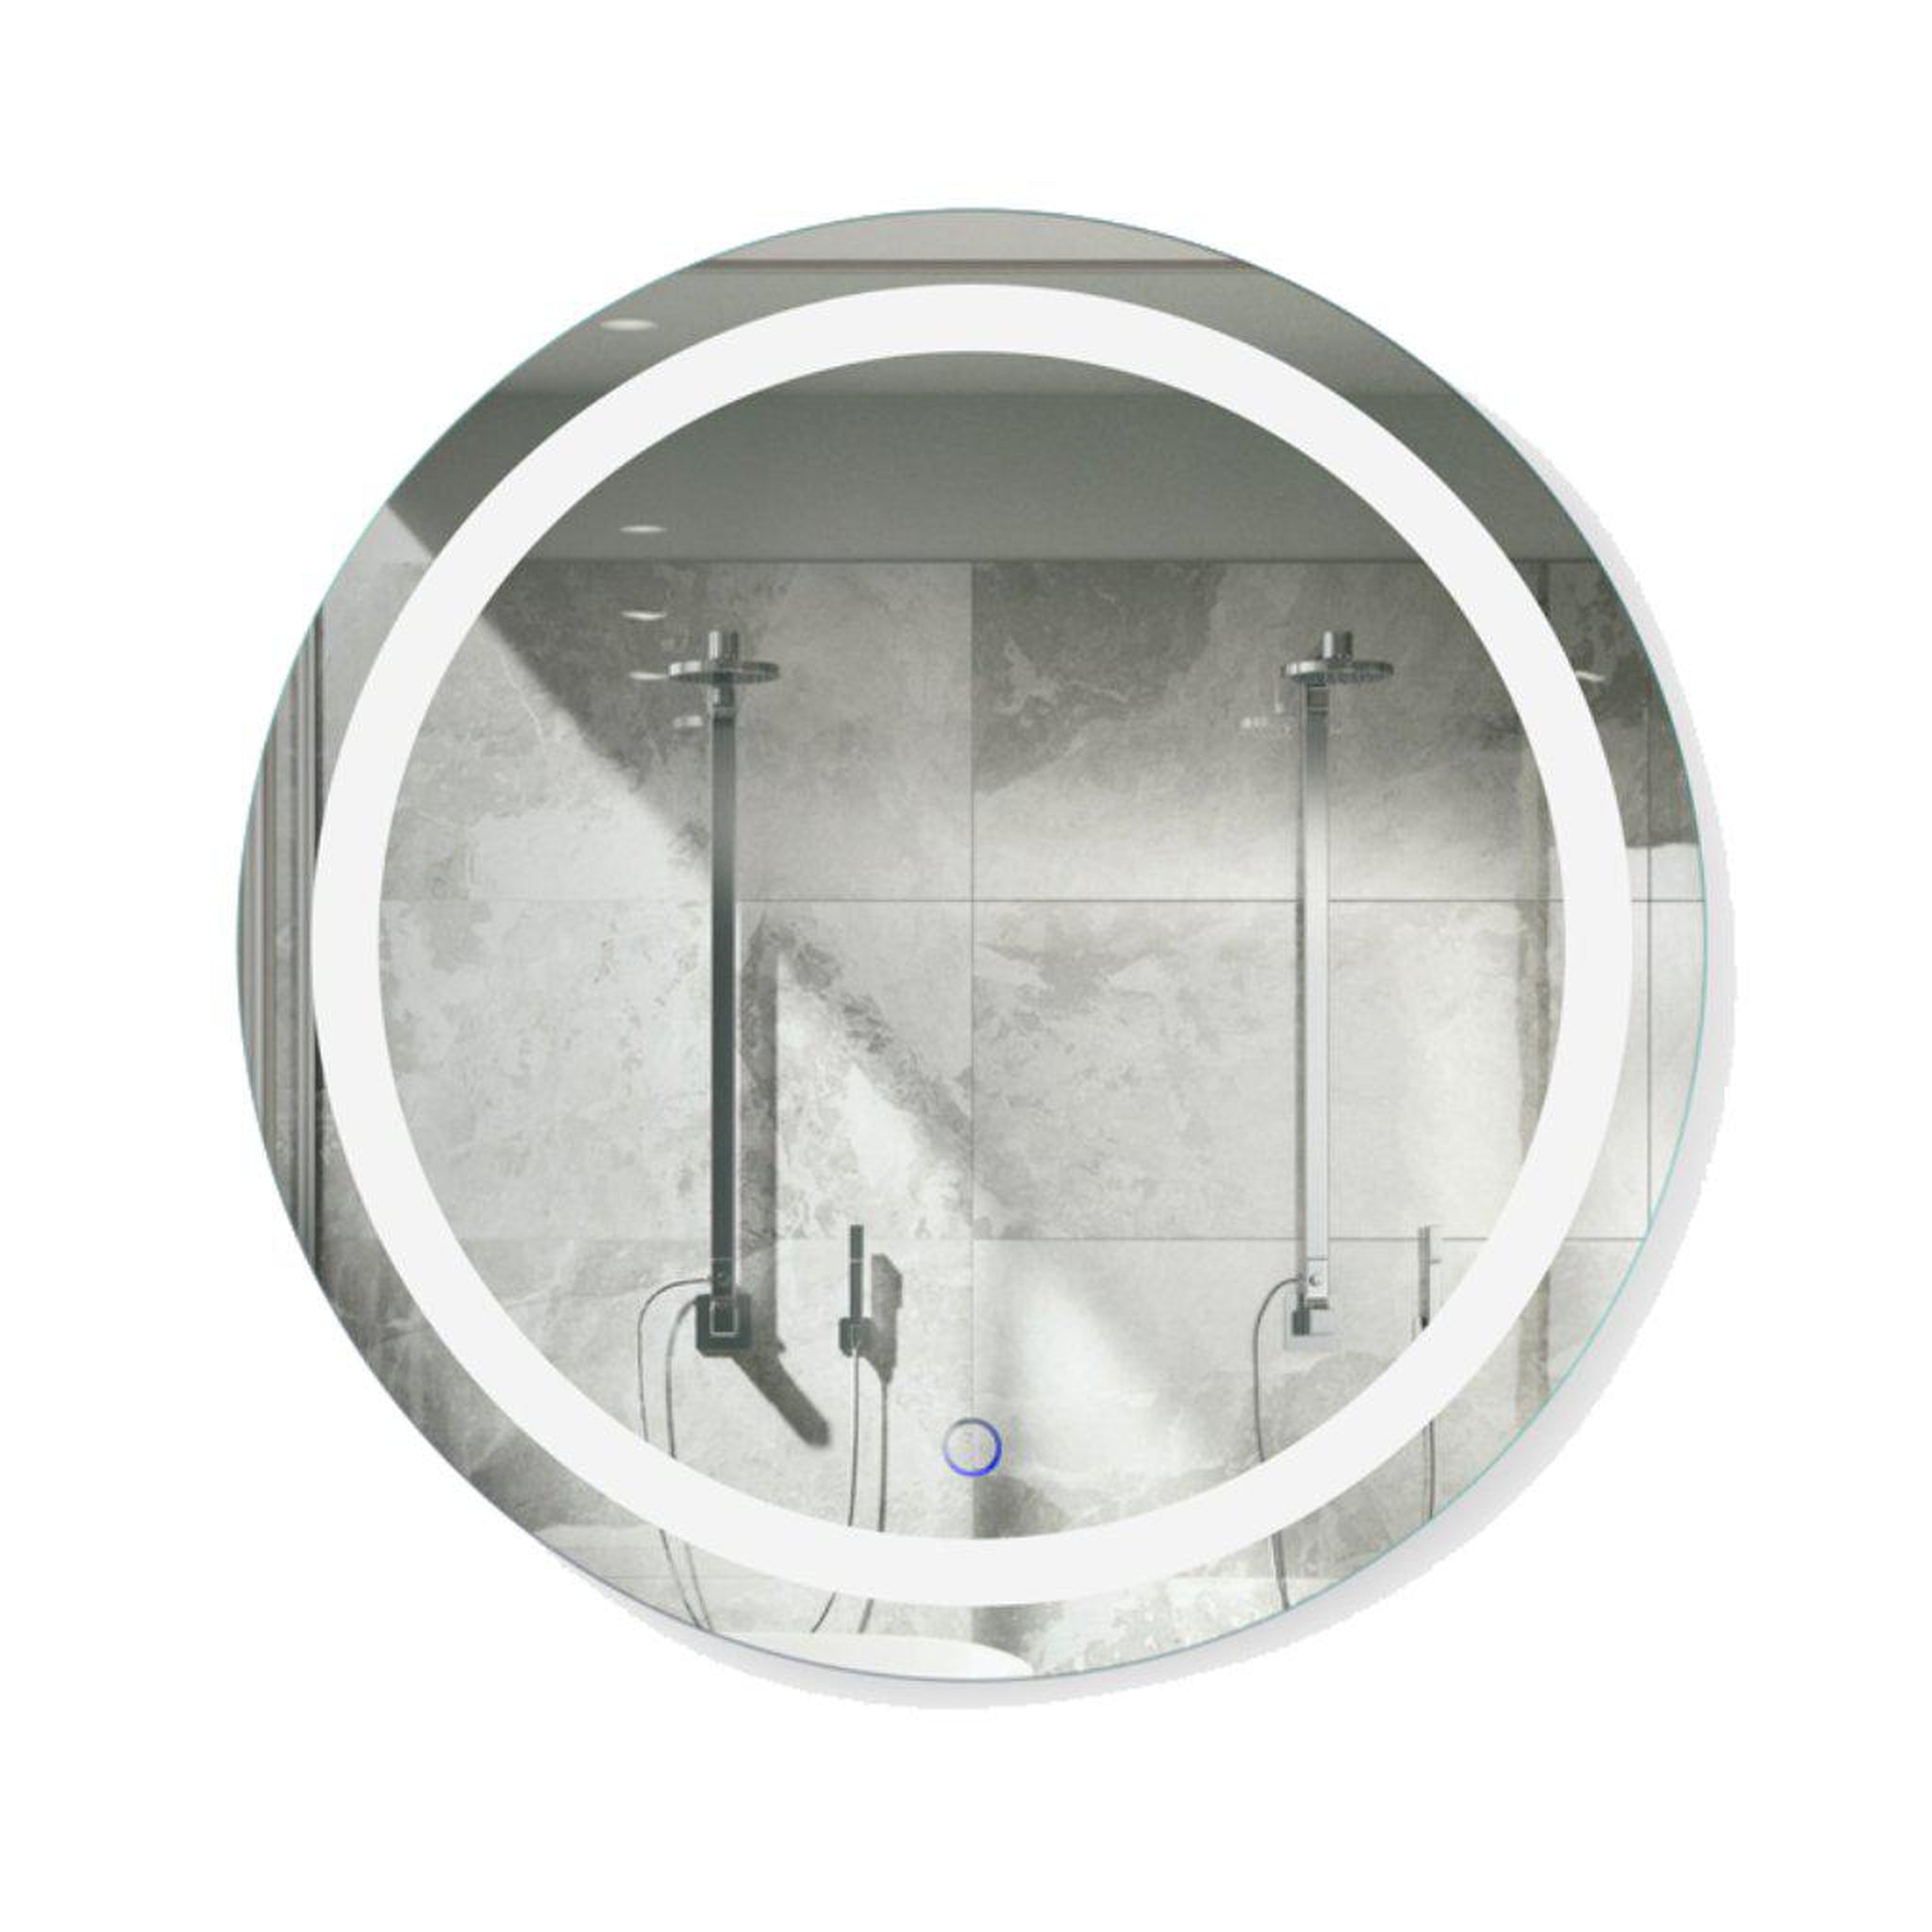 Krugg Reflections, Krugg Reflections Icon 24" x 24" 5000K Round Wall-Mounted Illuminated Silver Backed LED Mirror With Built-in Defogger and Touch Sensor On/Off Built-in Dimmer